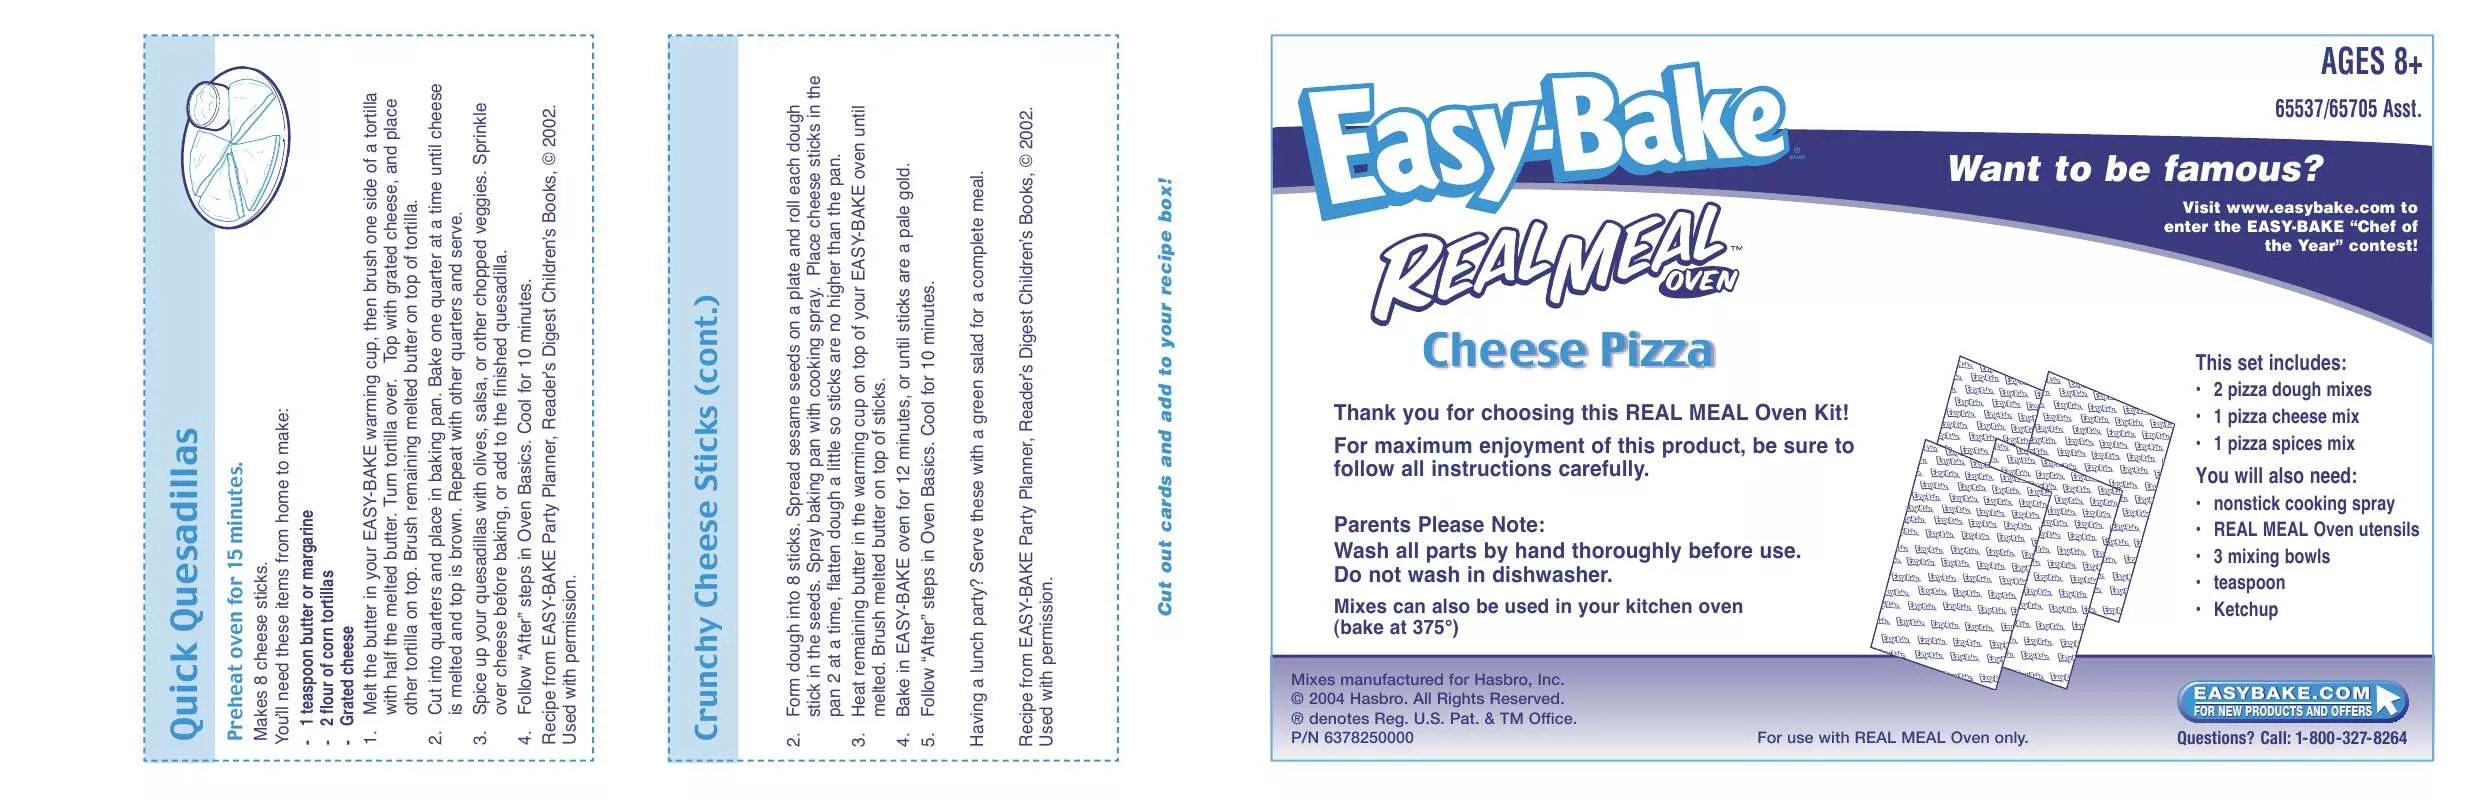 Mode d'emploi HASBRO EASY BAKE REAL MEAL OVEN CHEESE PIZZA